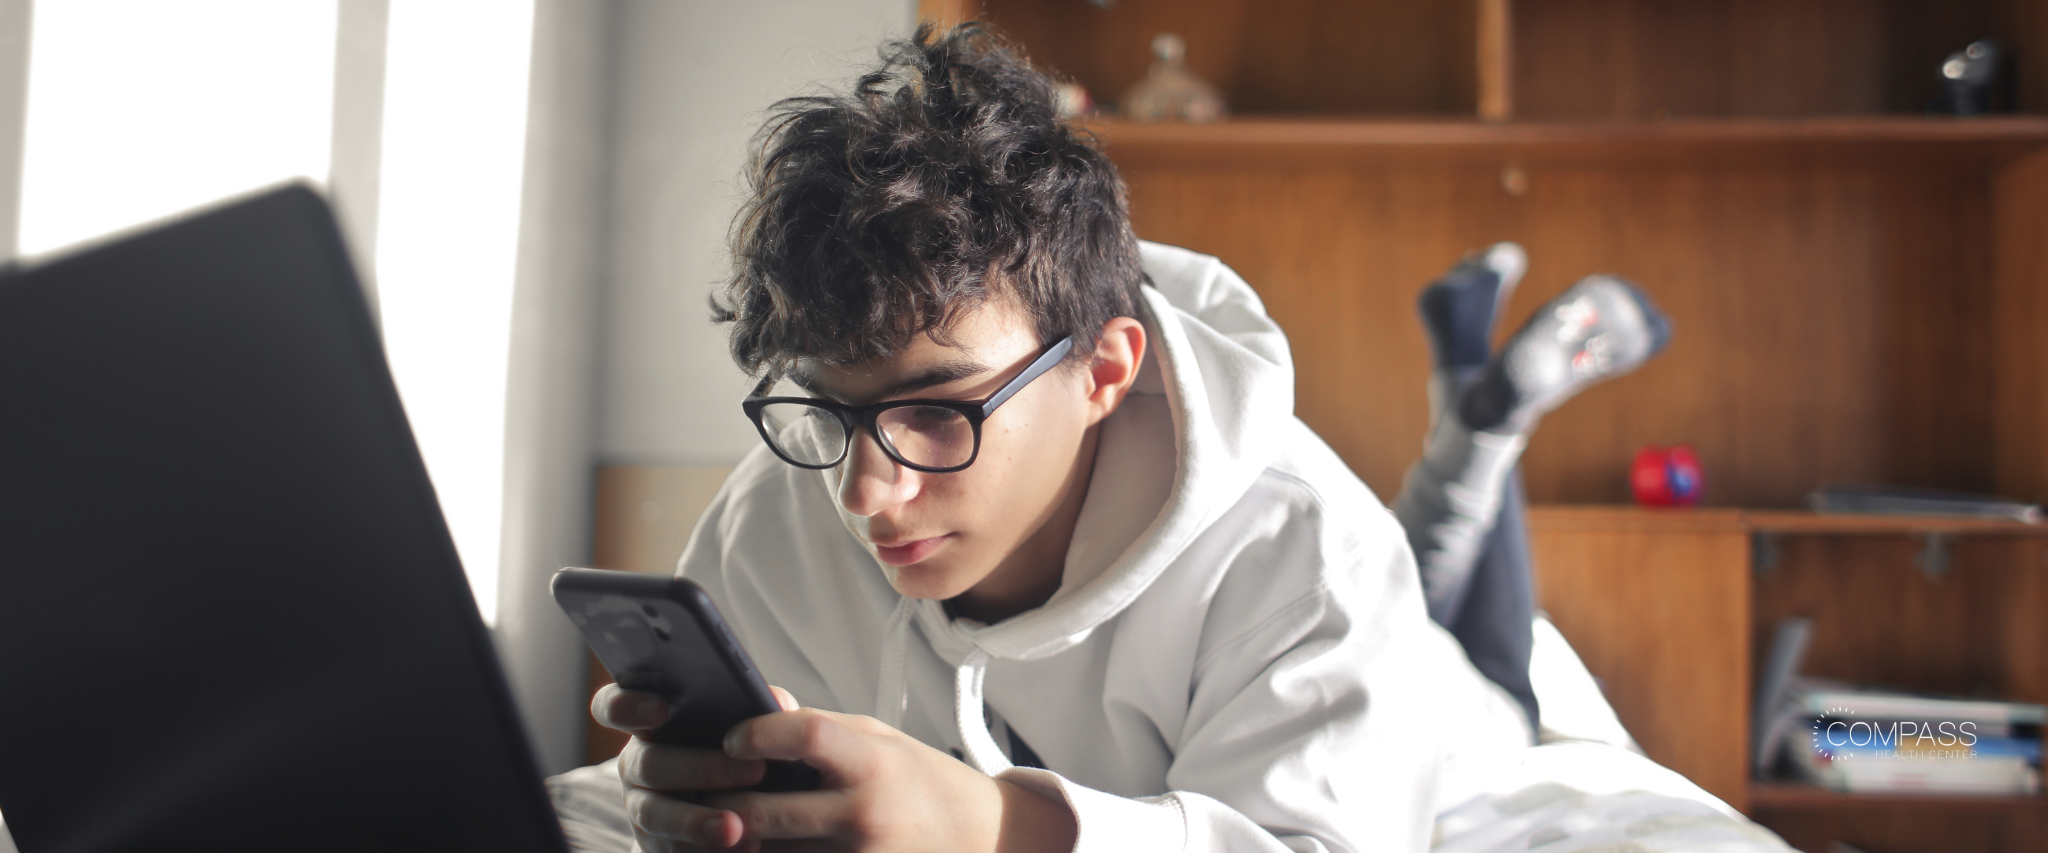 How Does Social Media Affect Teens and Their Mental Health?